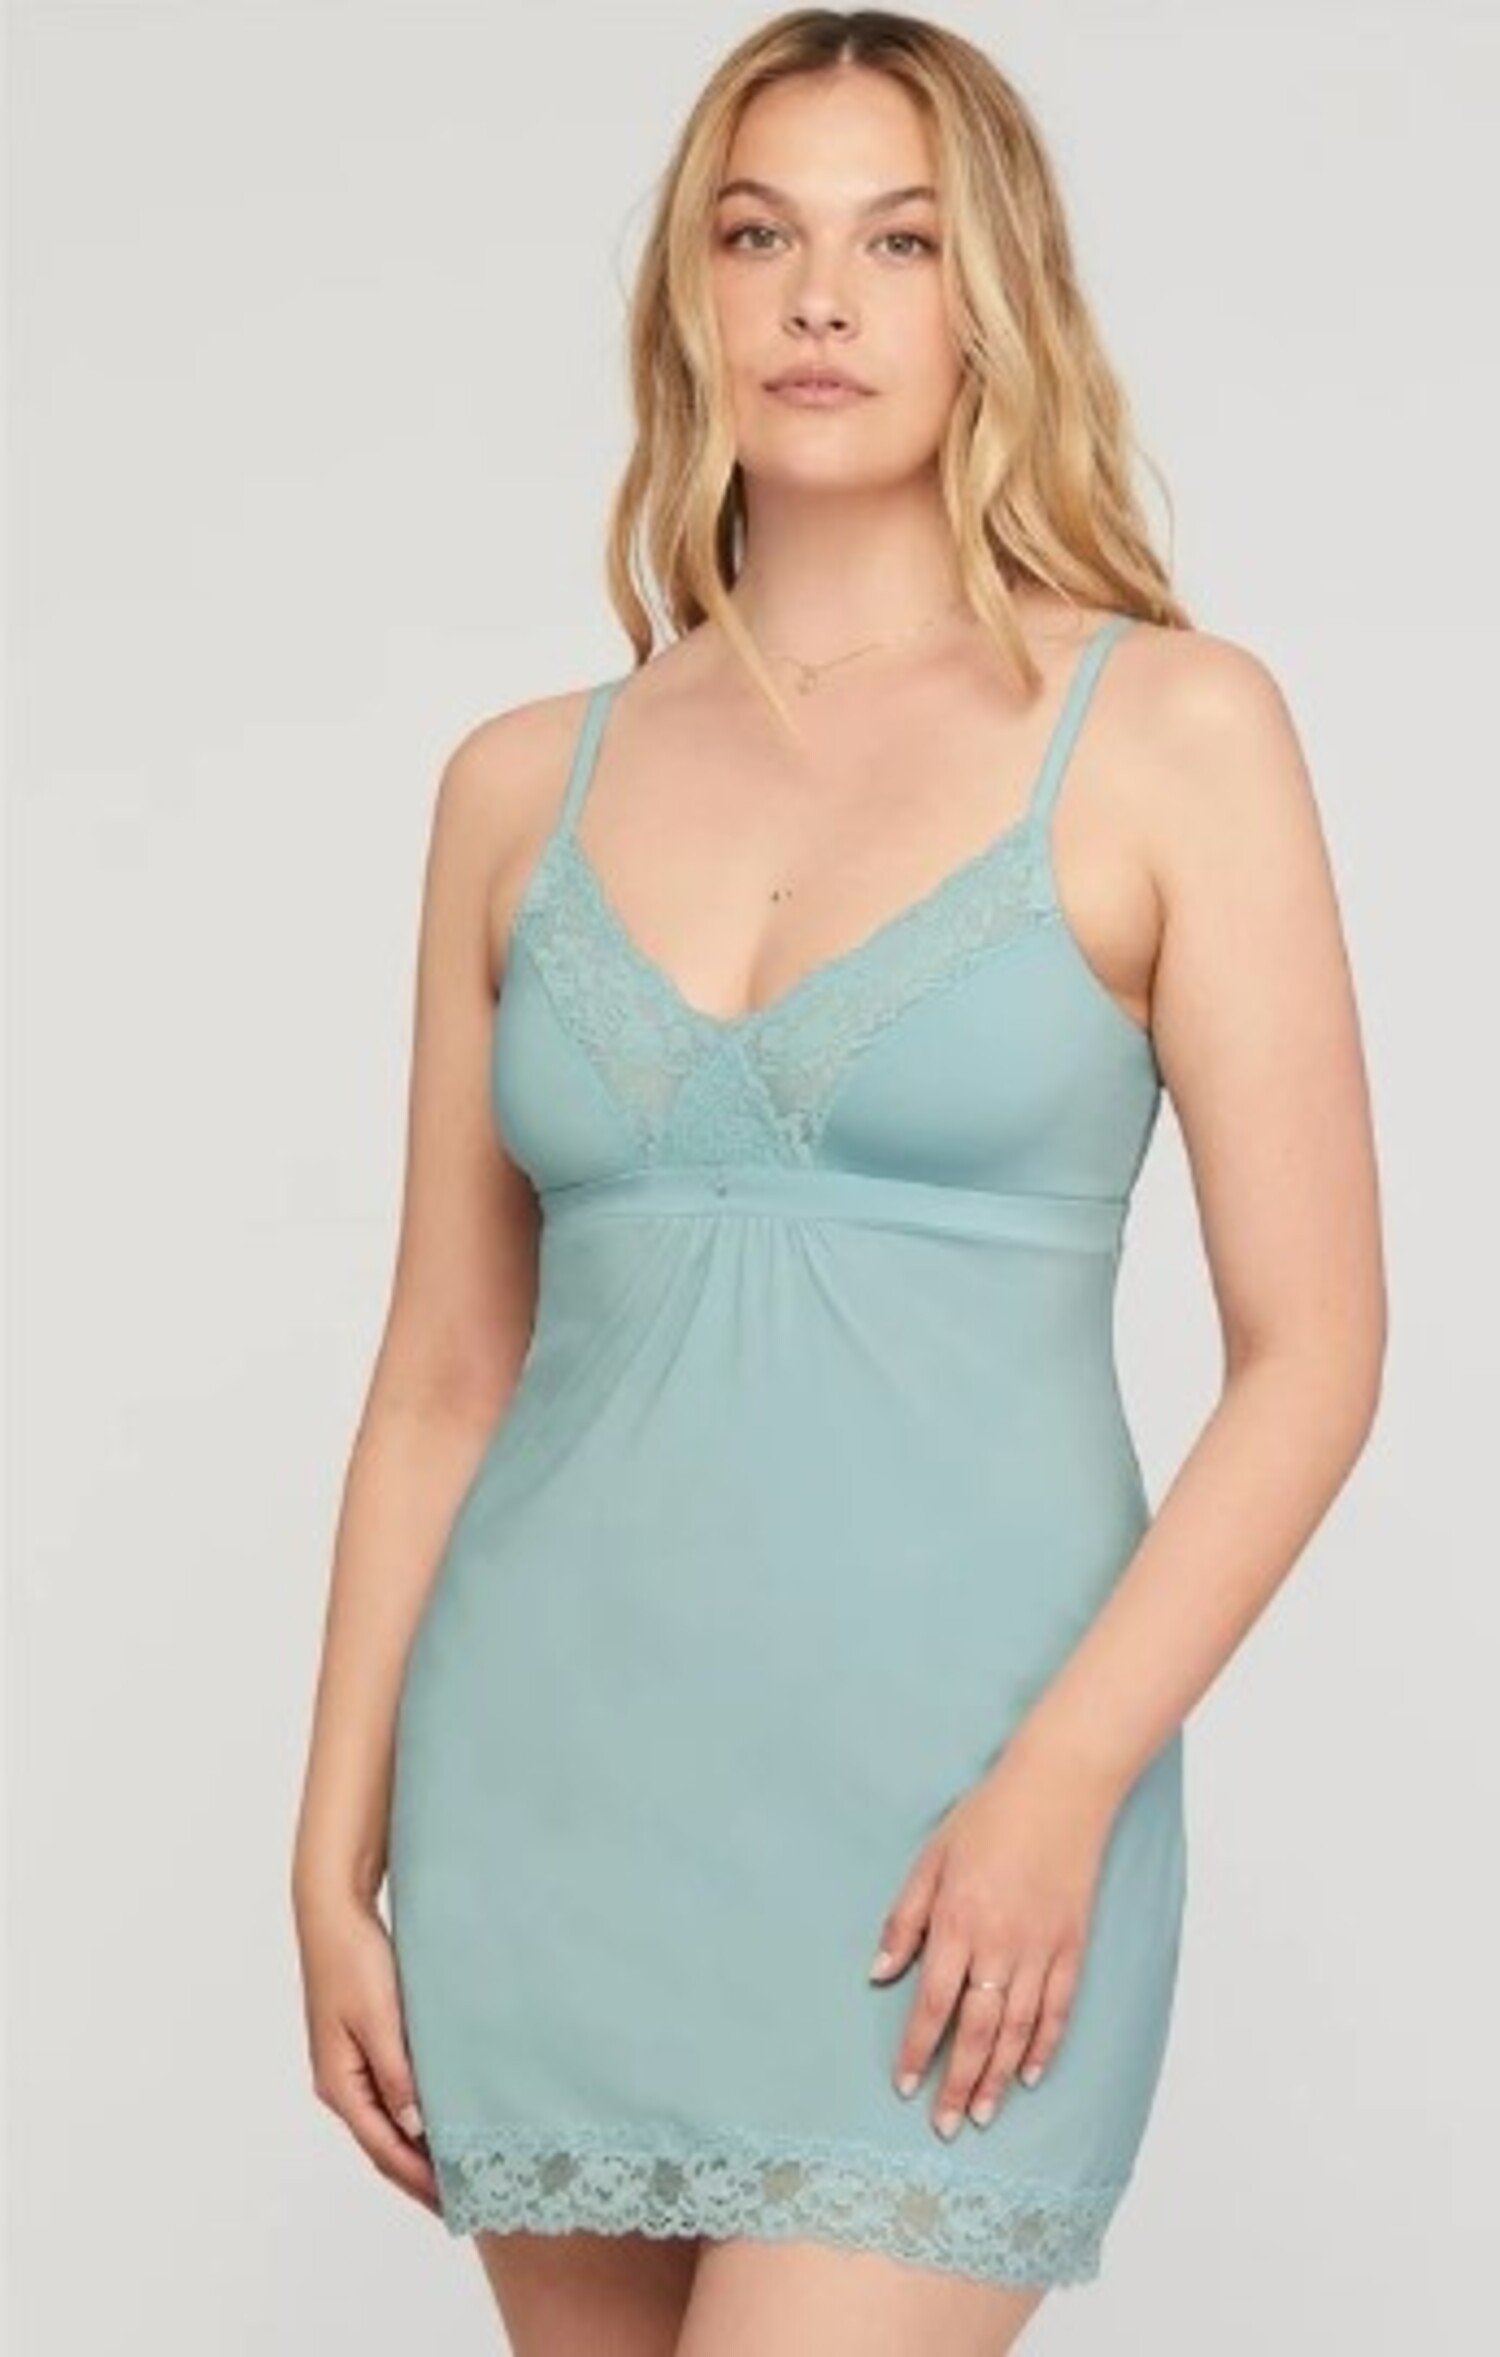 Montelle - Full Bust Lace Chemise Support - 9394F - The Bra Spa